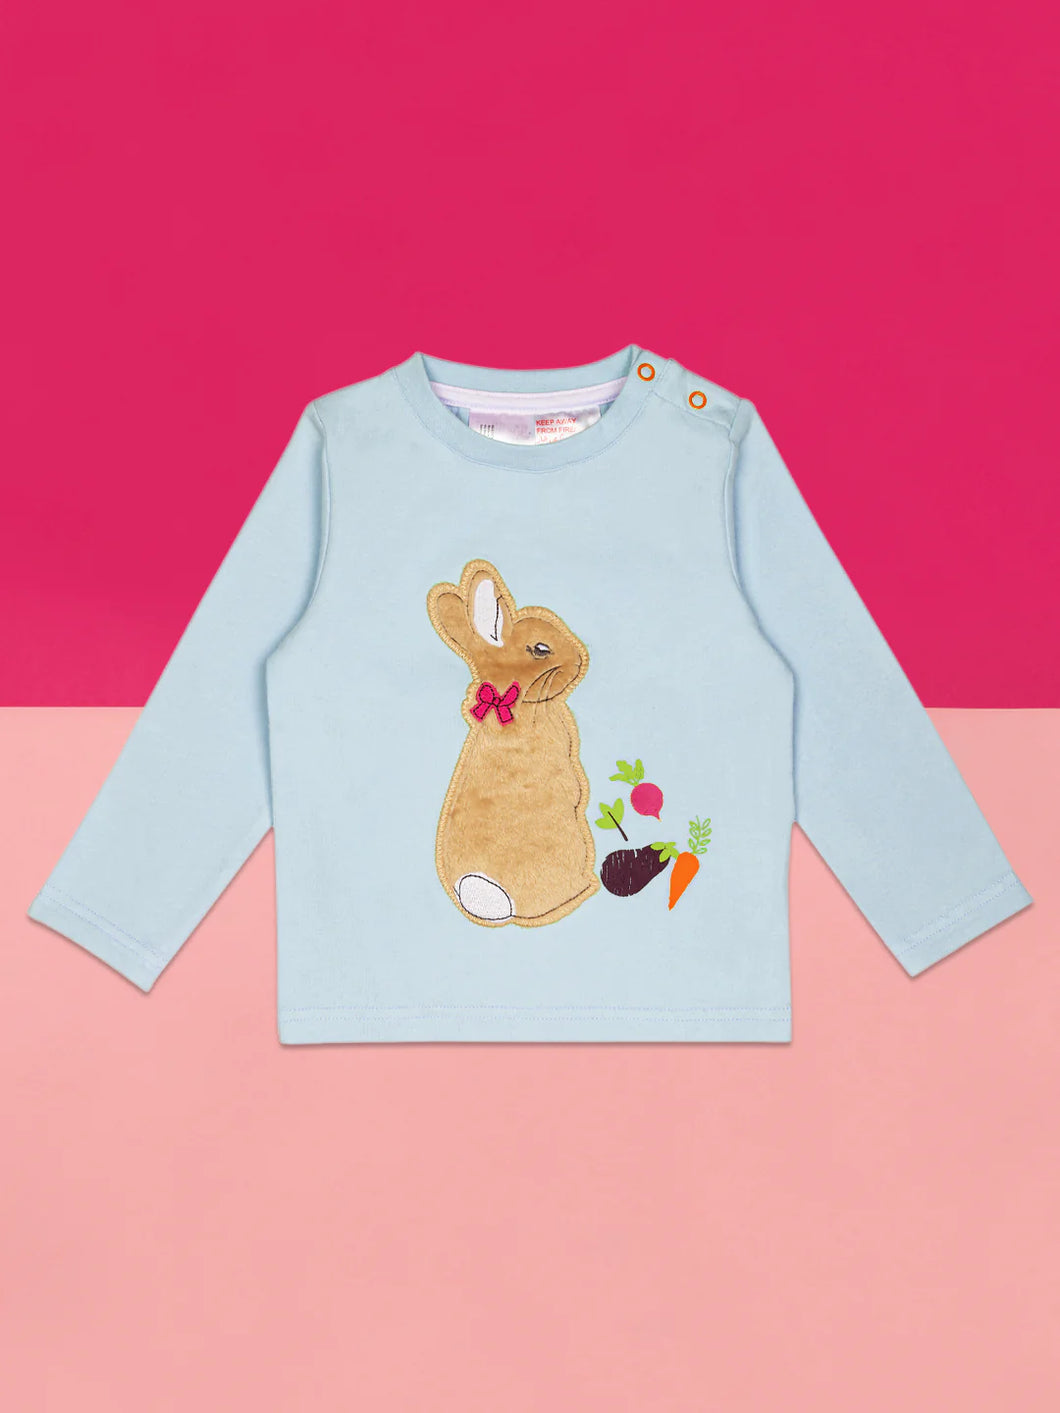 Blade & Rose Peter Rabbit Grow Your Own Top / 0-2 Years